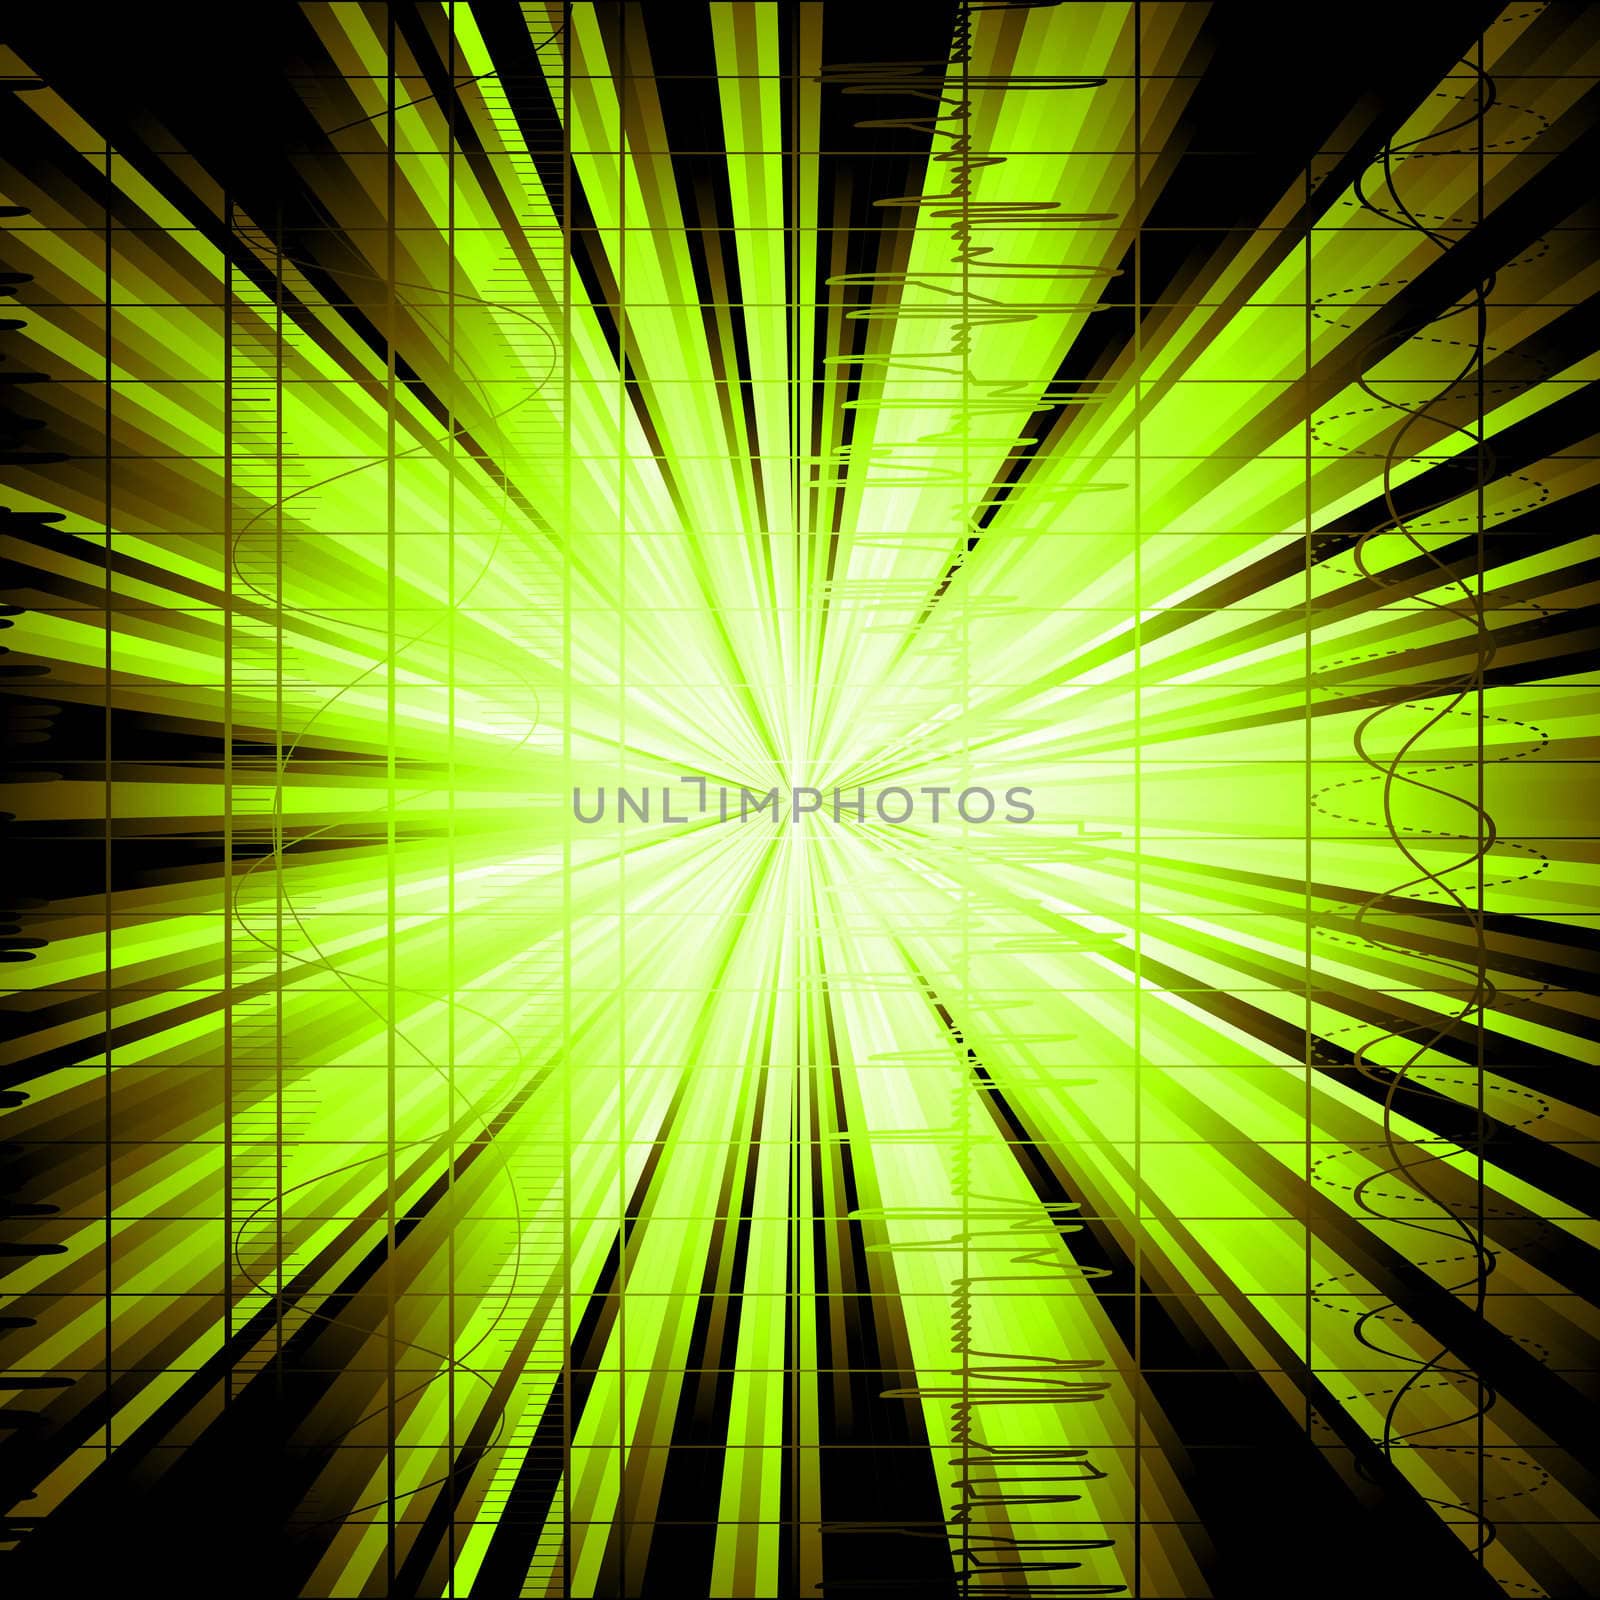 Techno style background with exploding rays and scale music waves